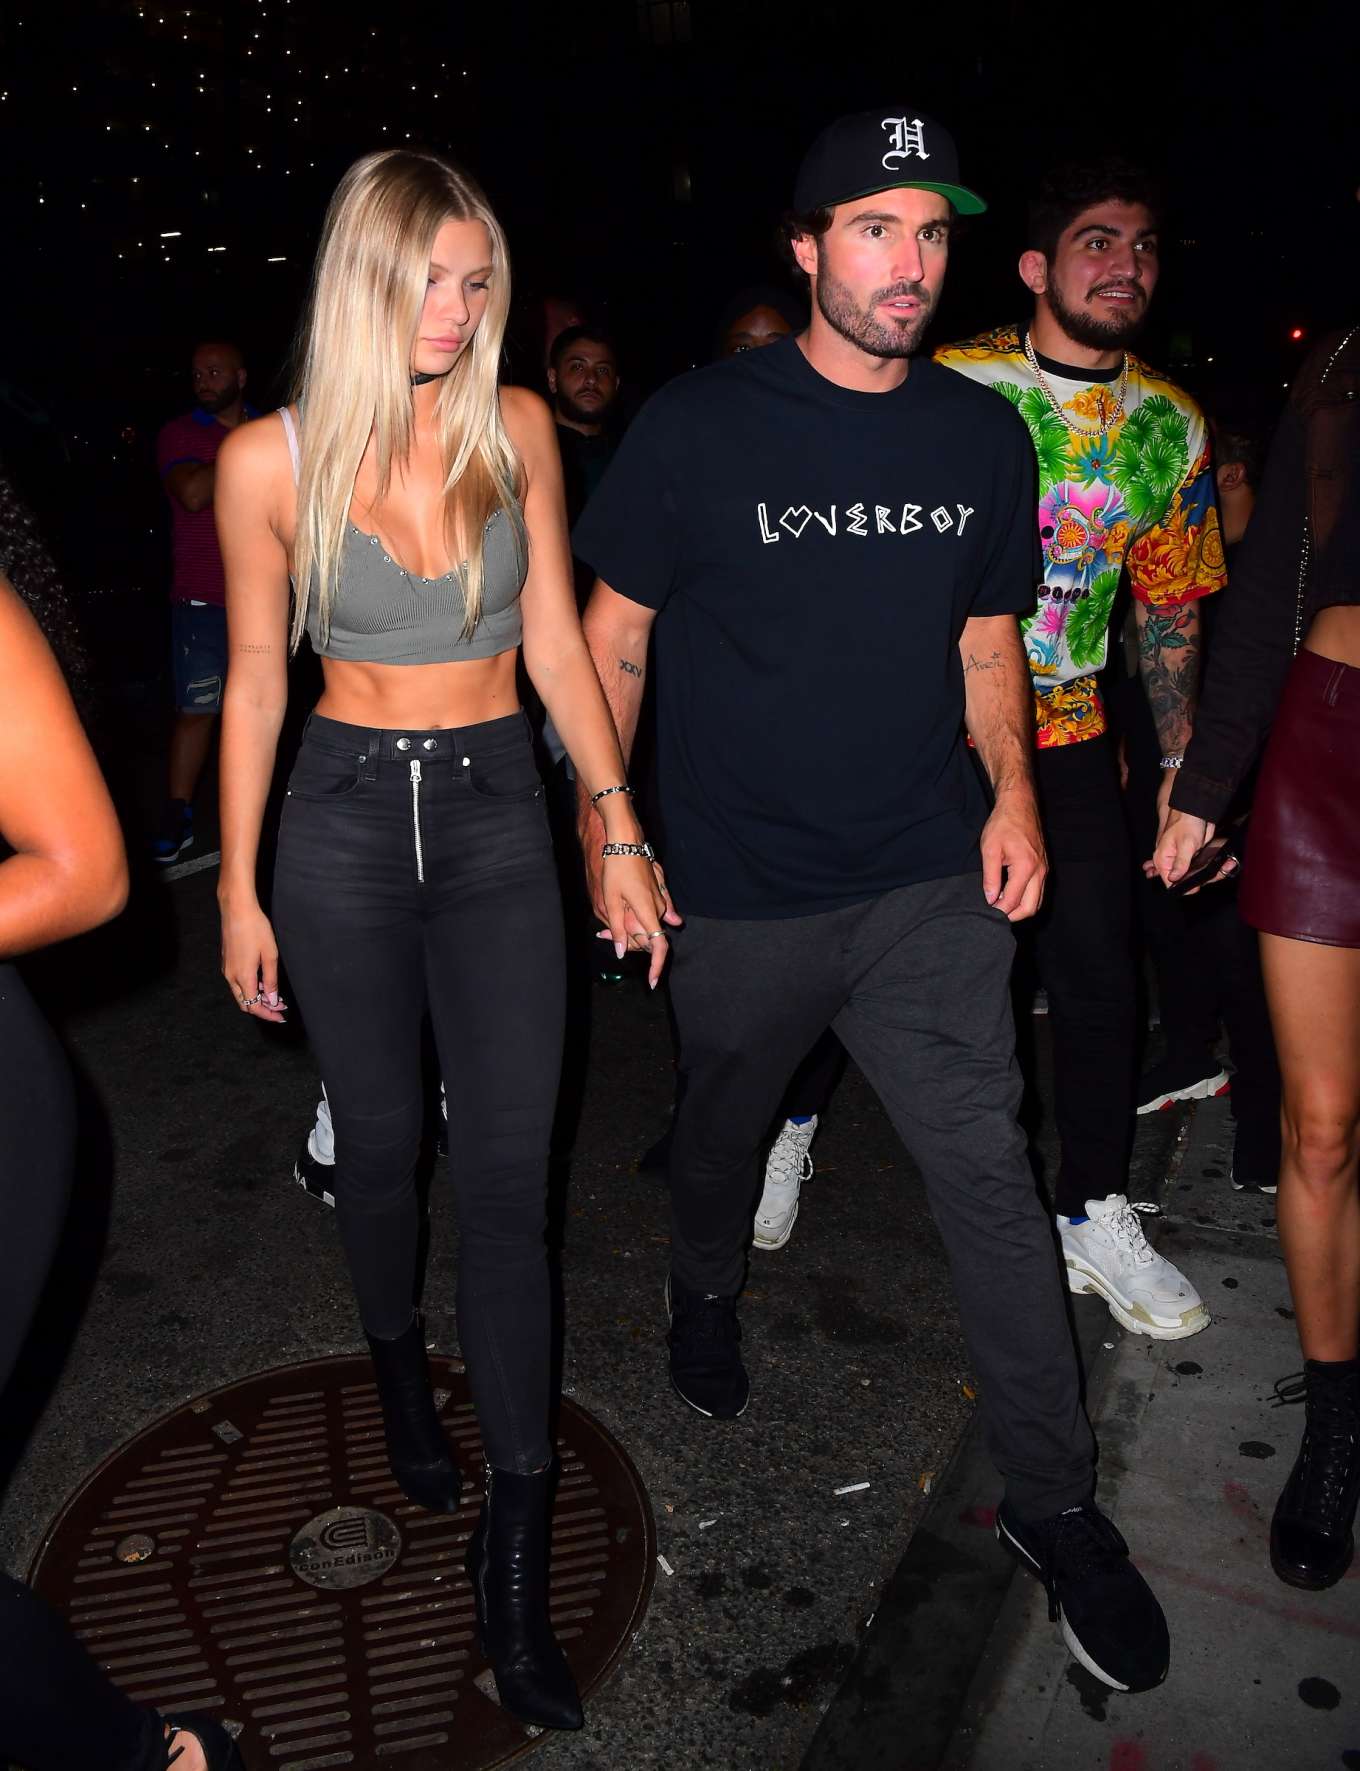 Josie Canseco at a Nightclub in New York